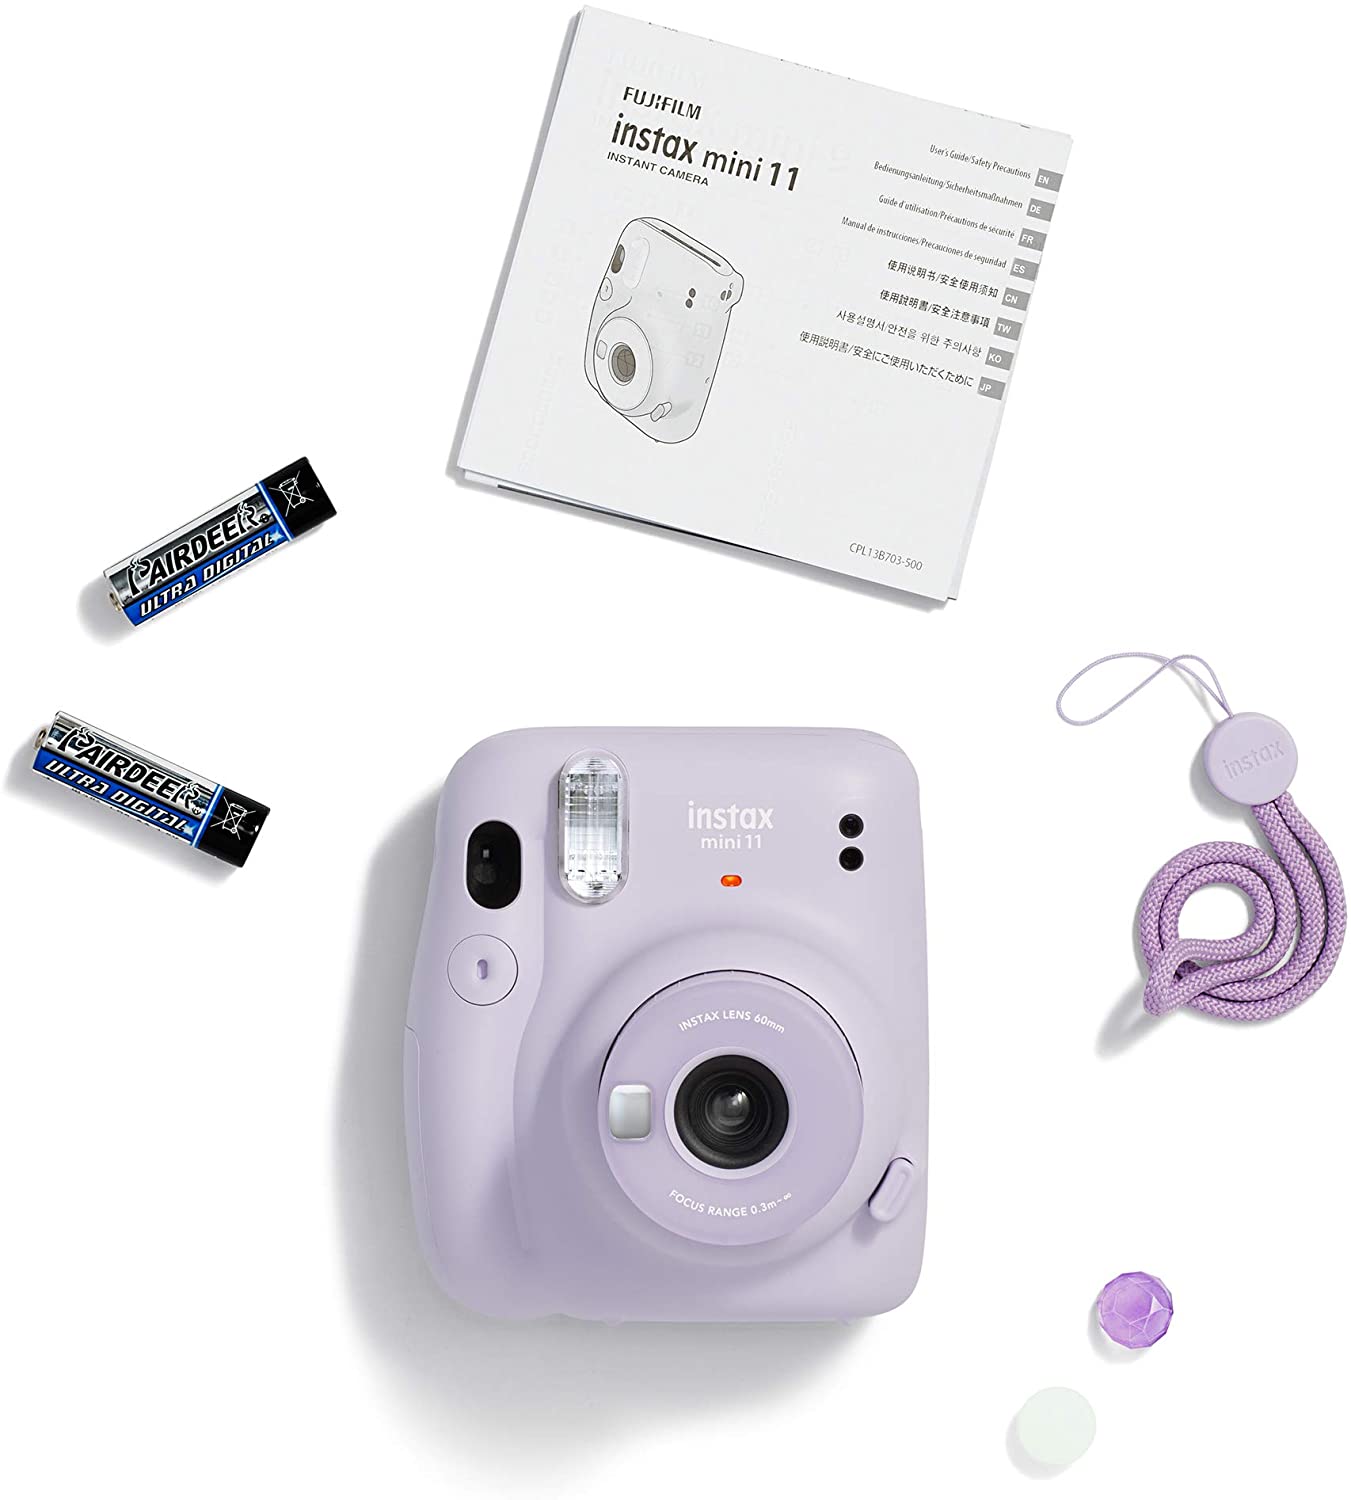 Fujifilm Instax Mini 11 Lilac Purple Camera with Fuji Instant Film Twin Pack (40 Pictures) + Purple Case, Album, Stickers, Color Lenses and More Accessories Bundle - image 3 of 7